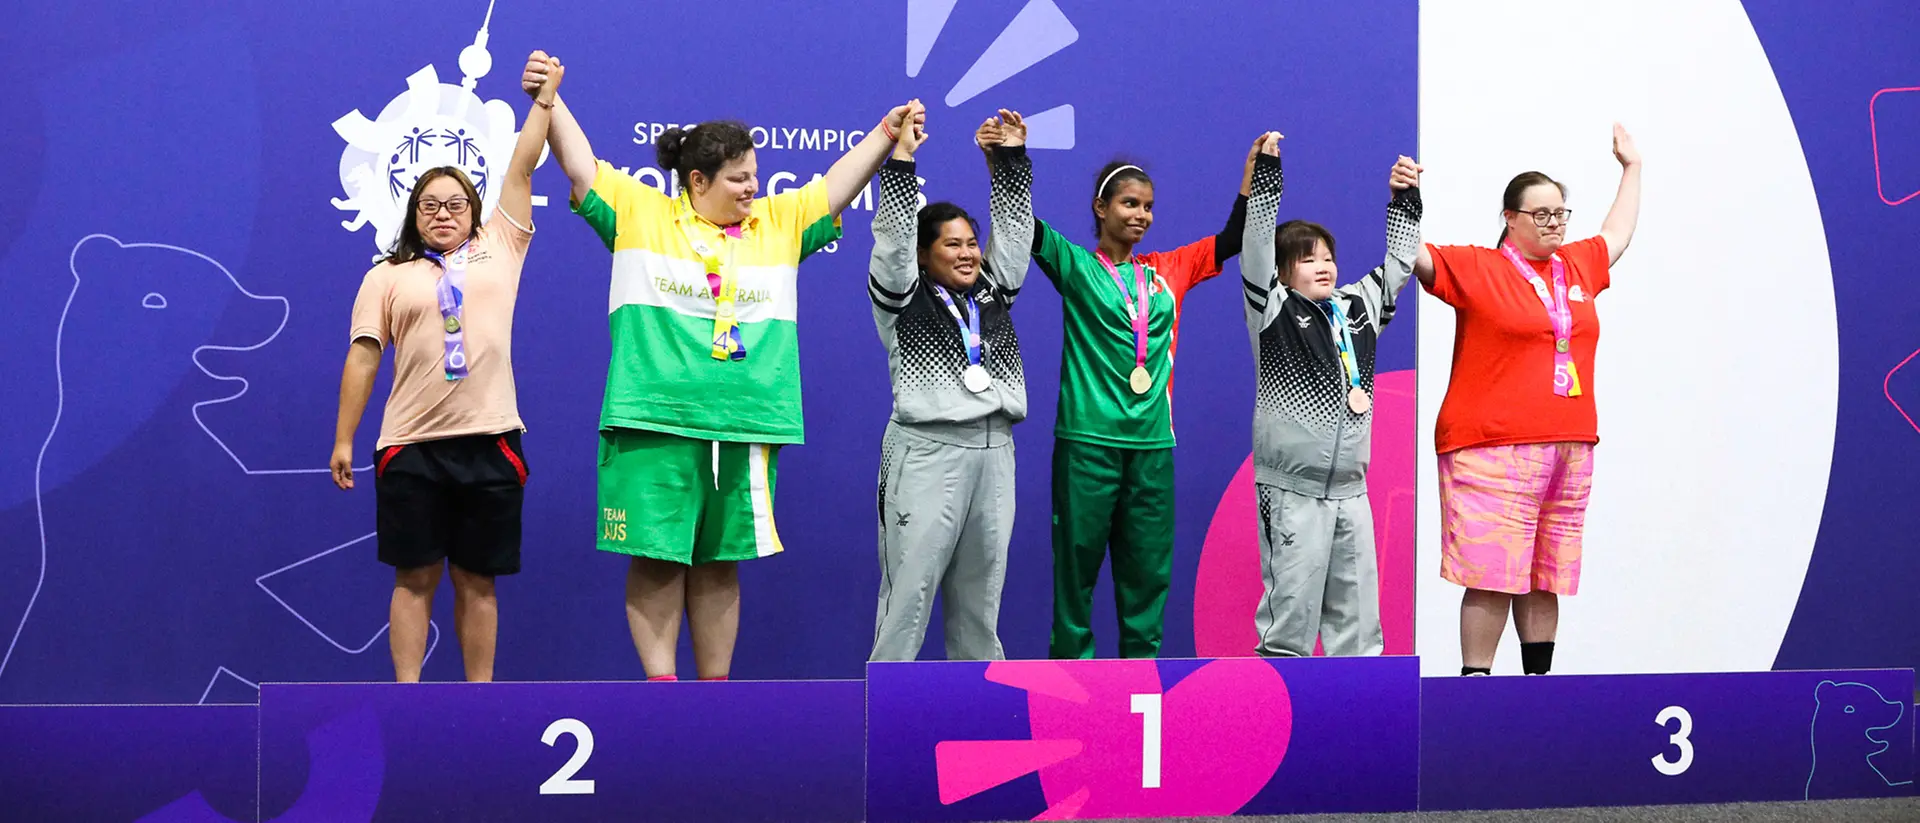 Six athletes stand on the podium at the Special Olympics and raise their arms in the air.